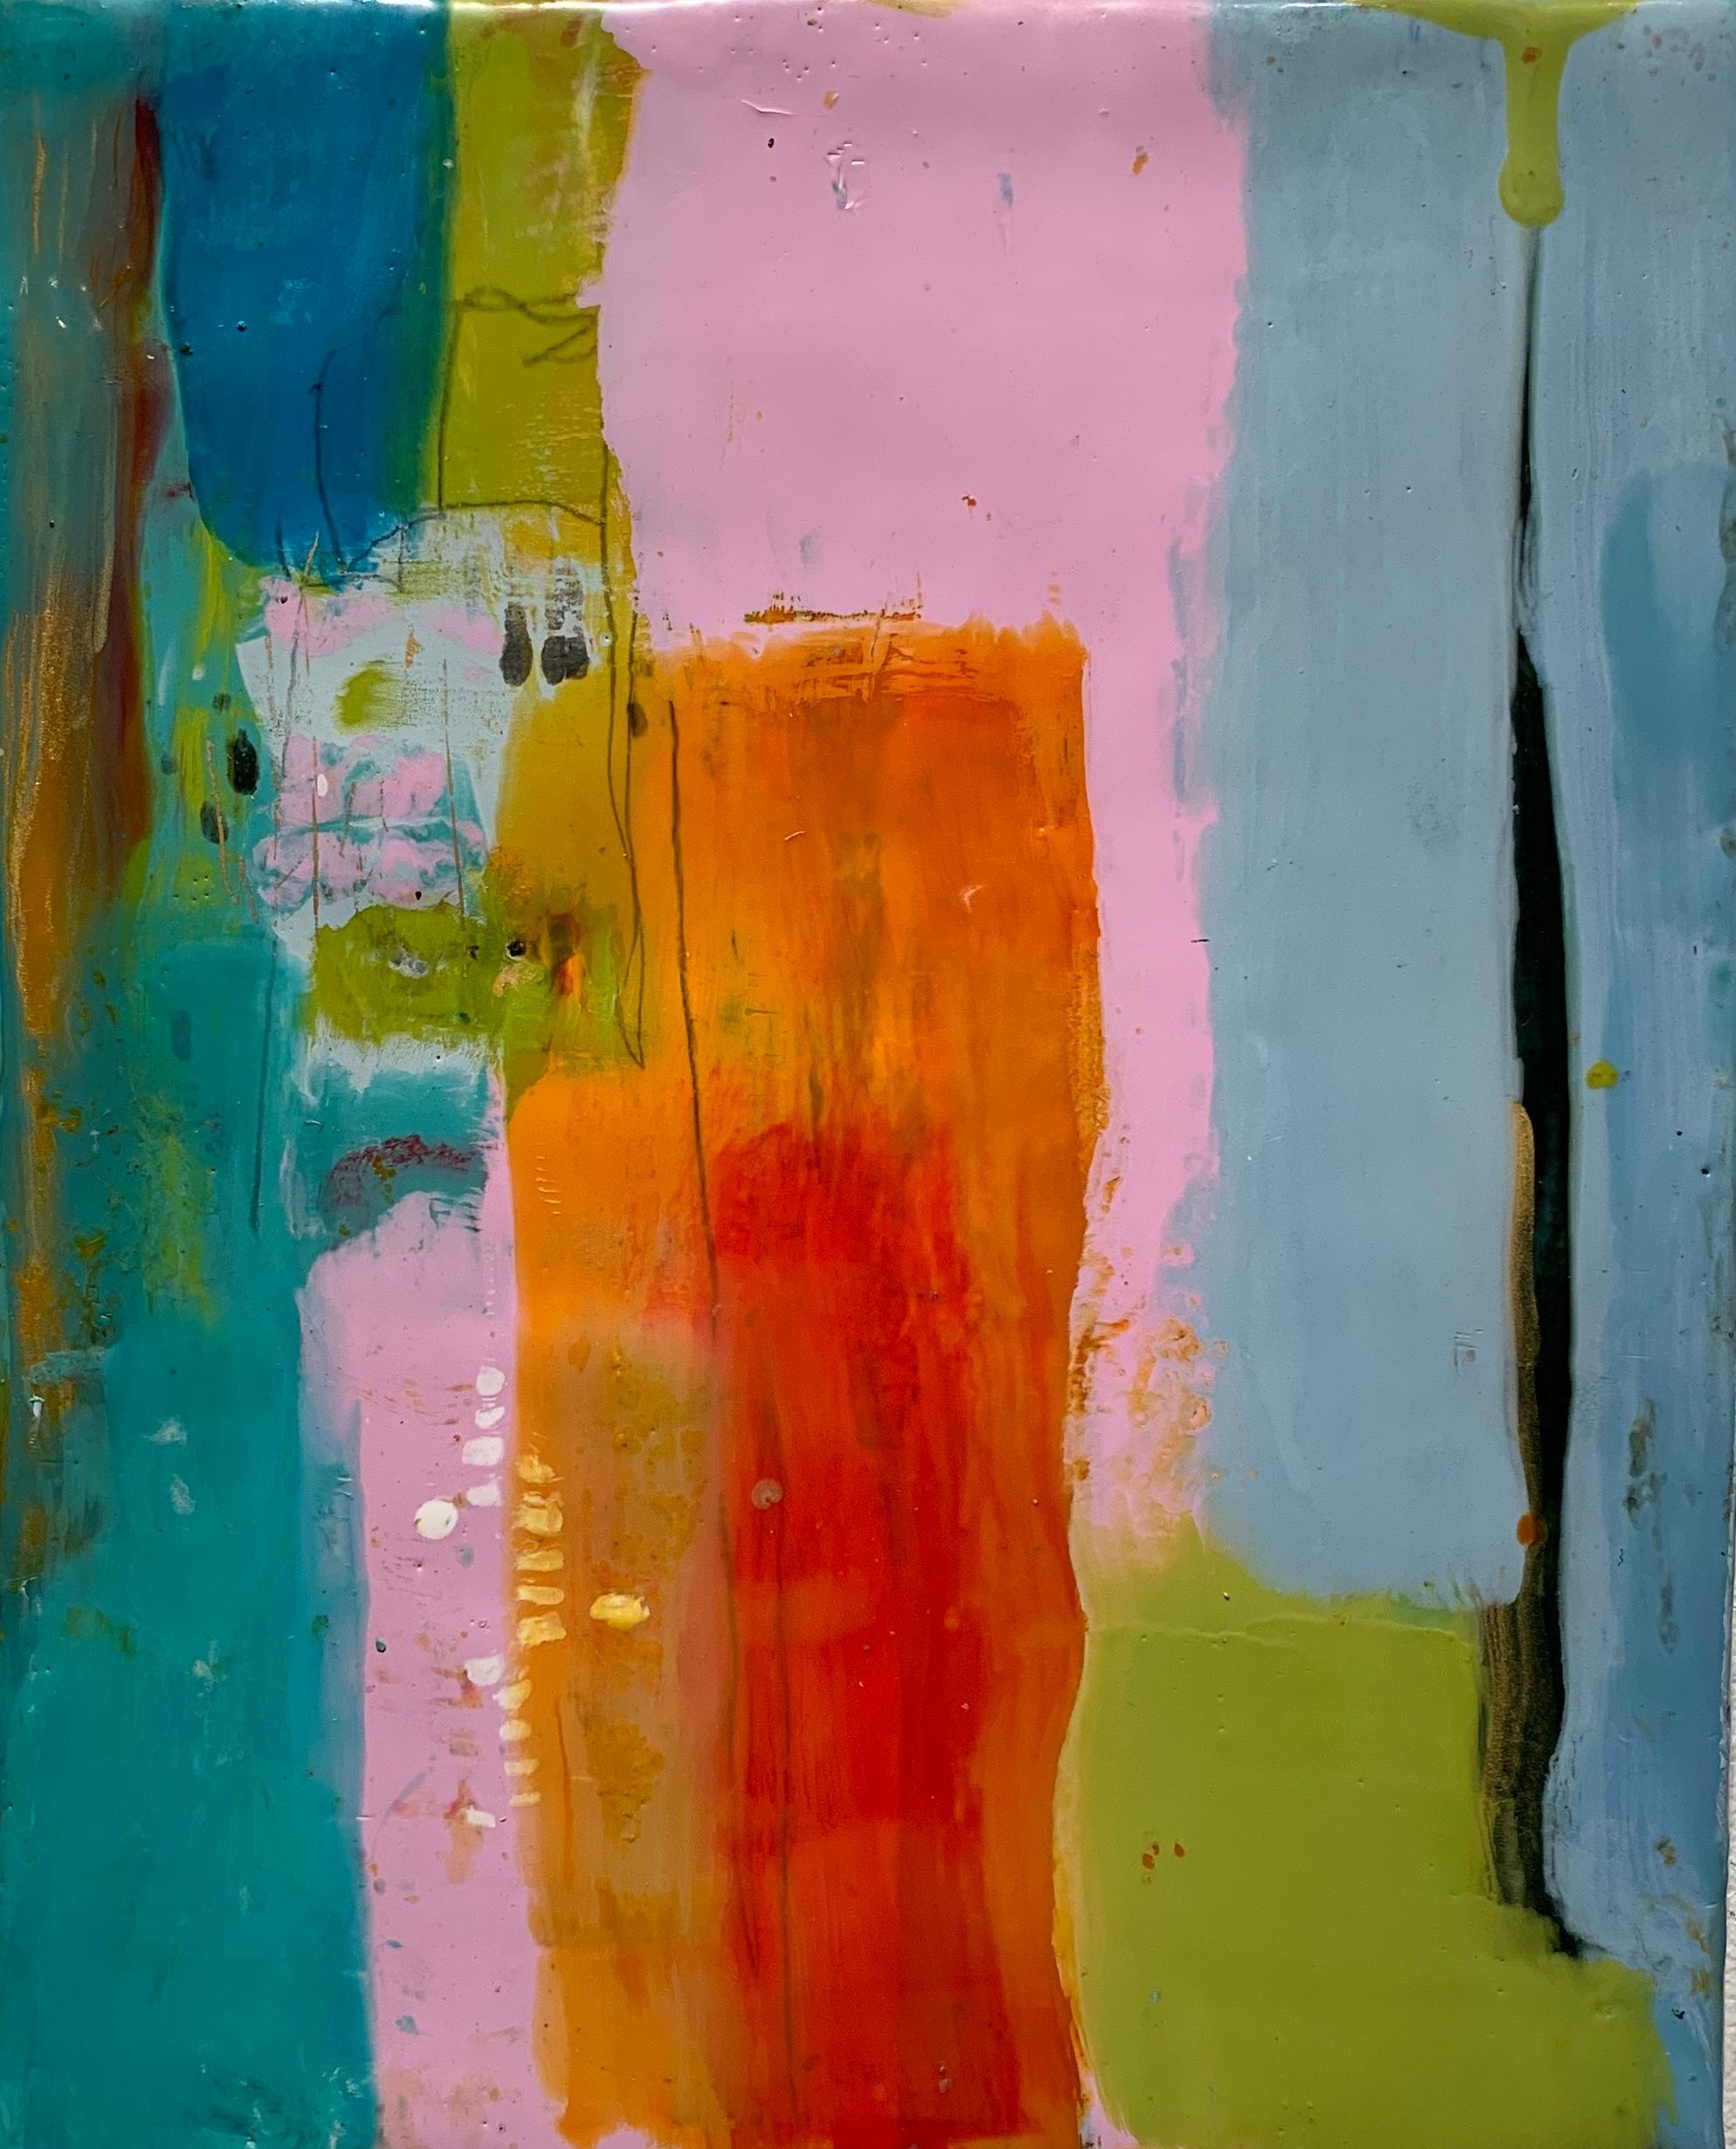 Navigation 7, bright multicolored abstract painting, encaustic on board